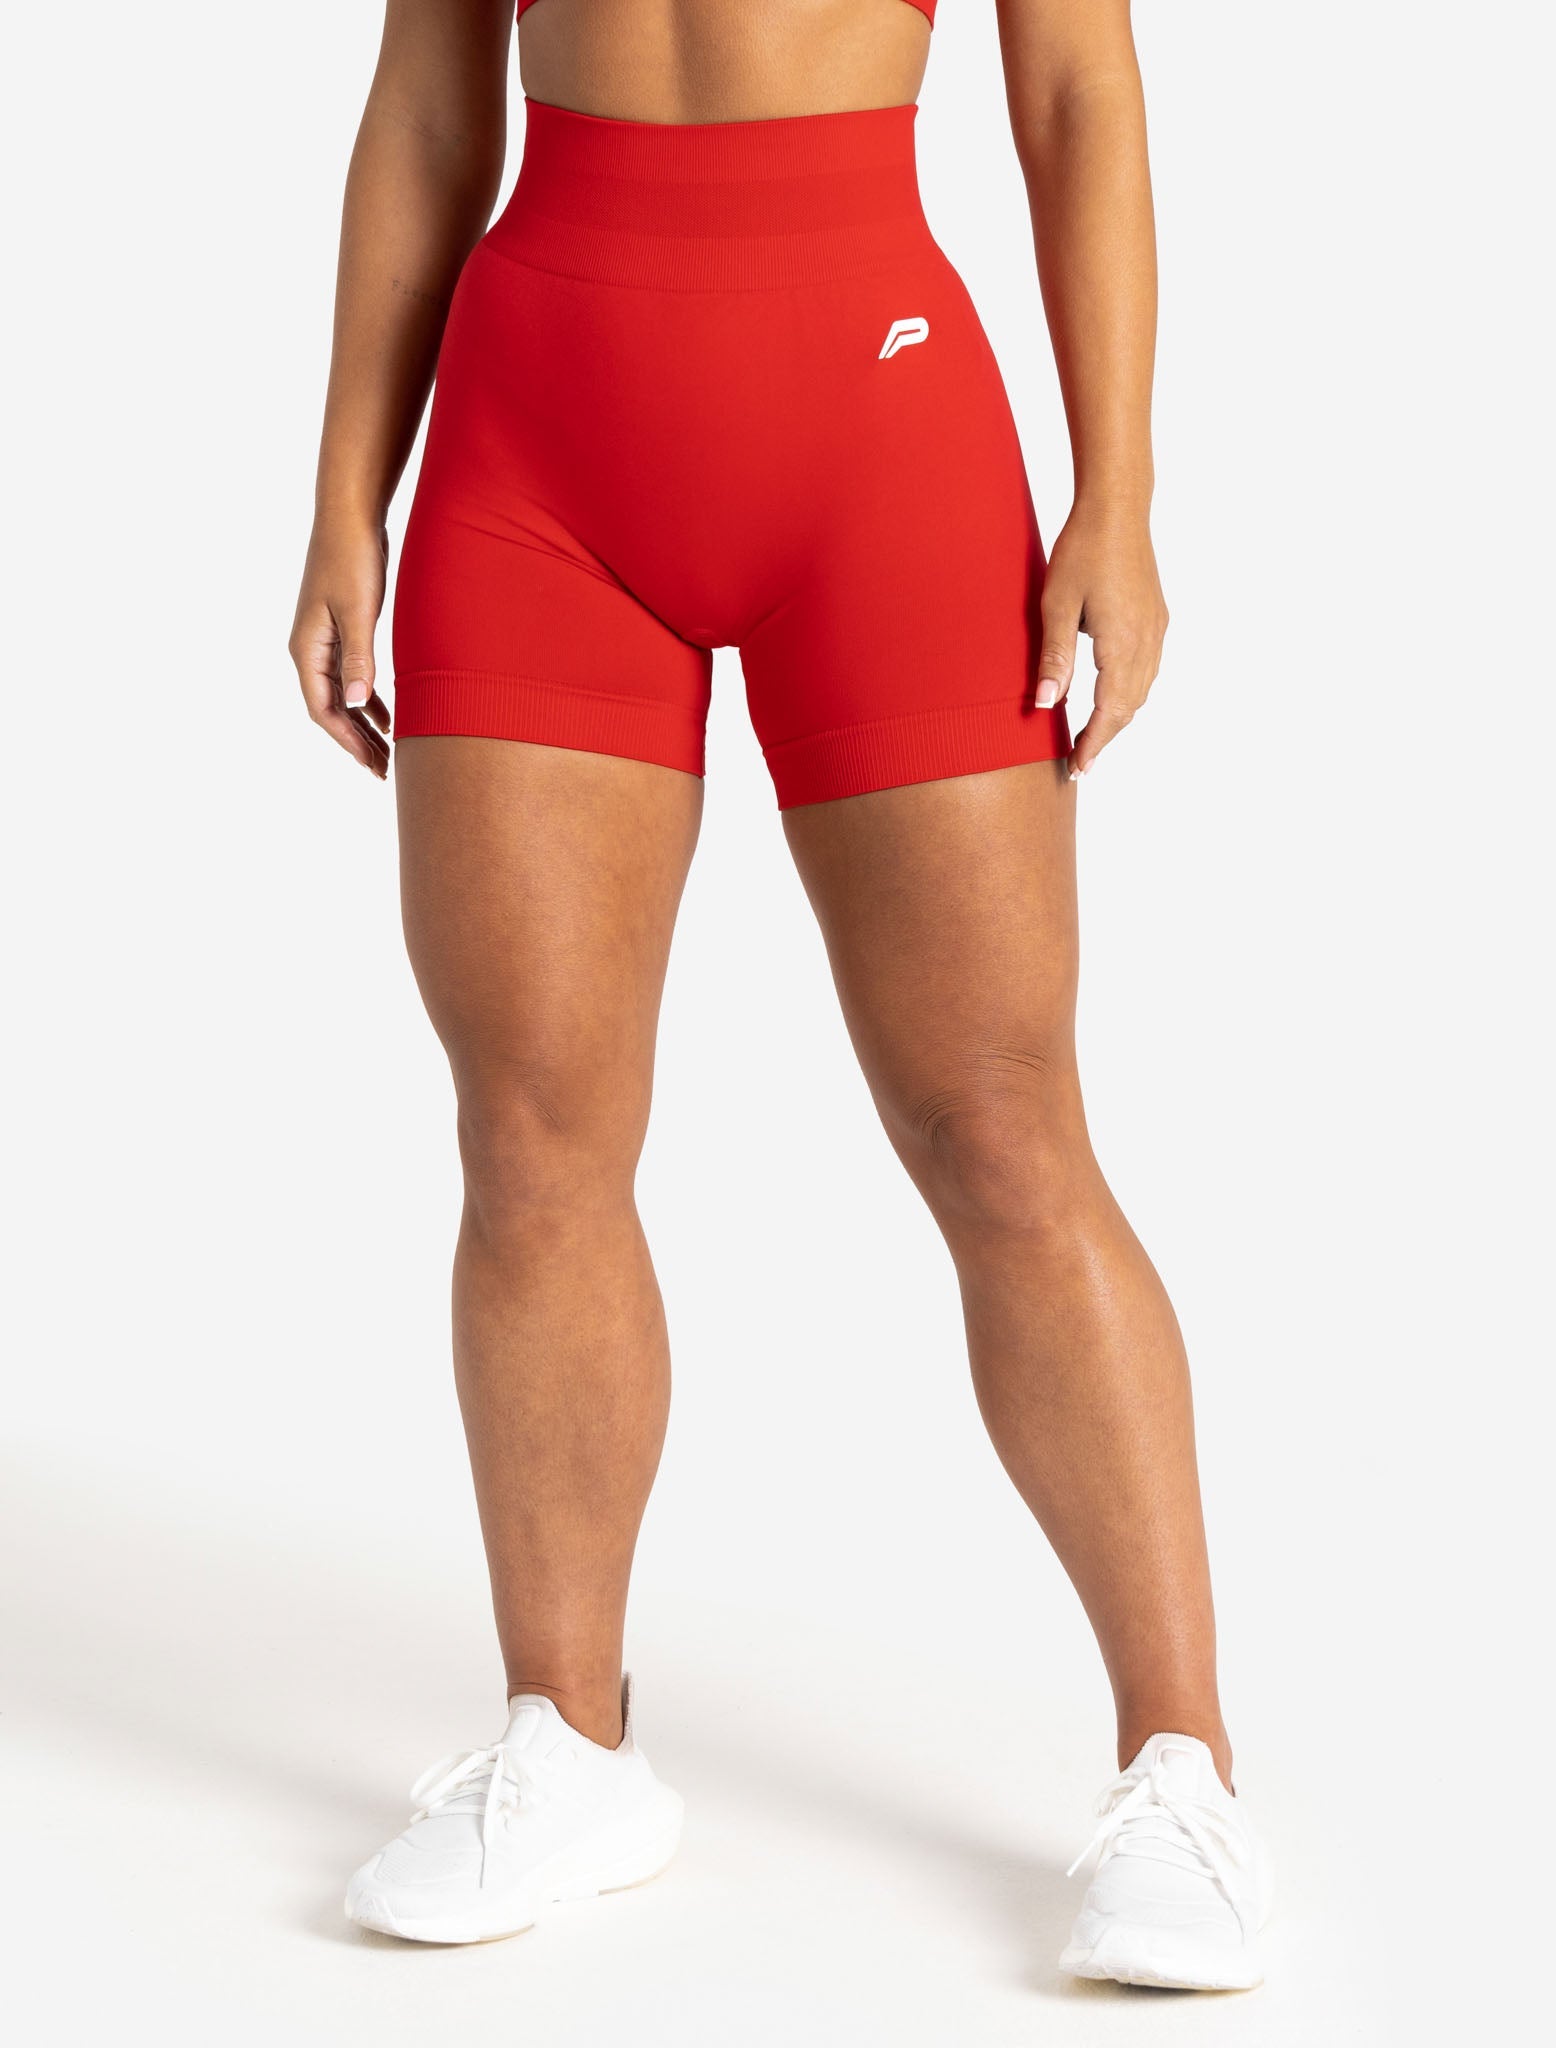 Scrunch Seamless Shorts / Candy Red Pursue Fitness 1